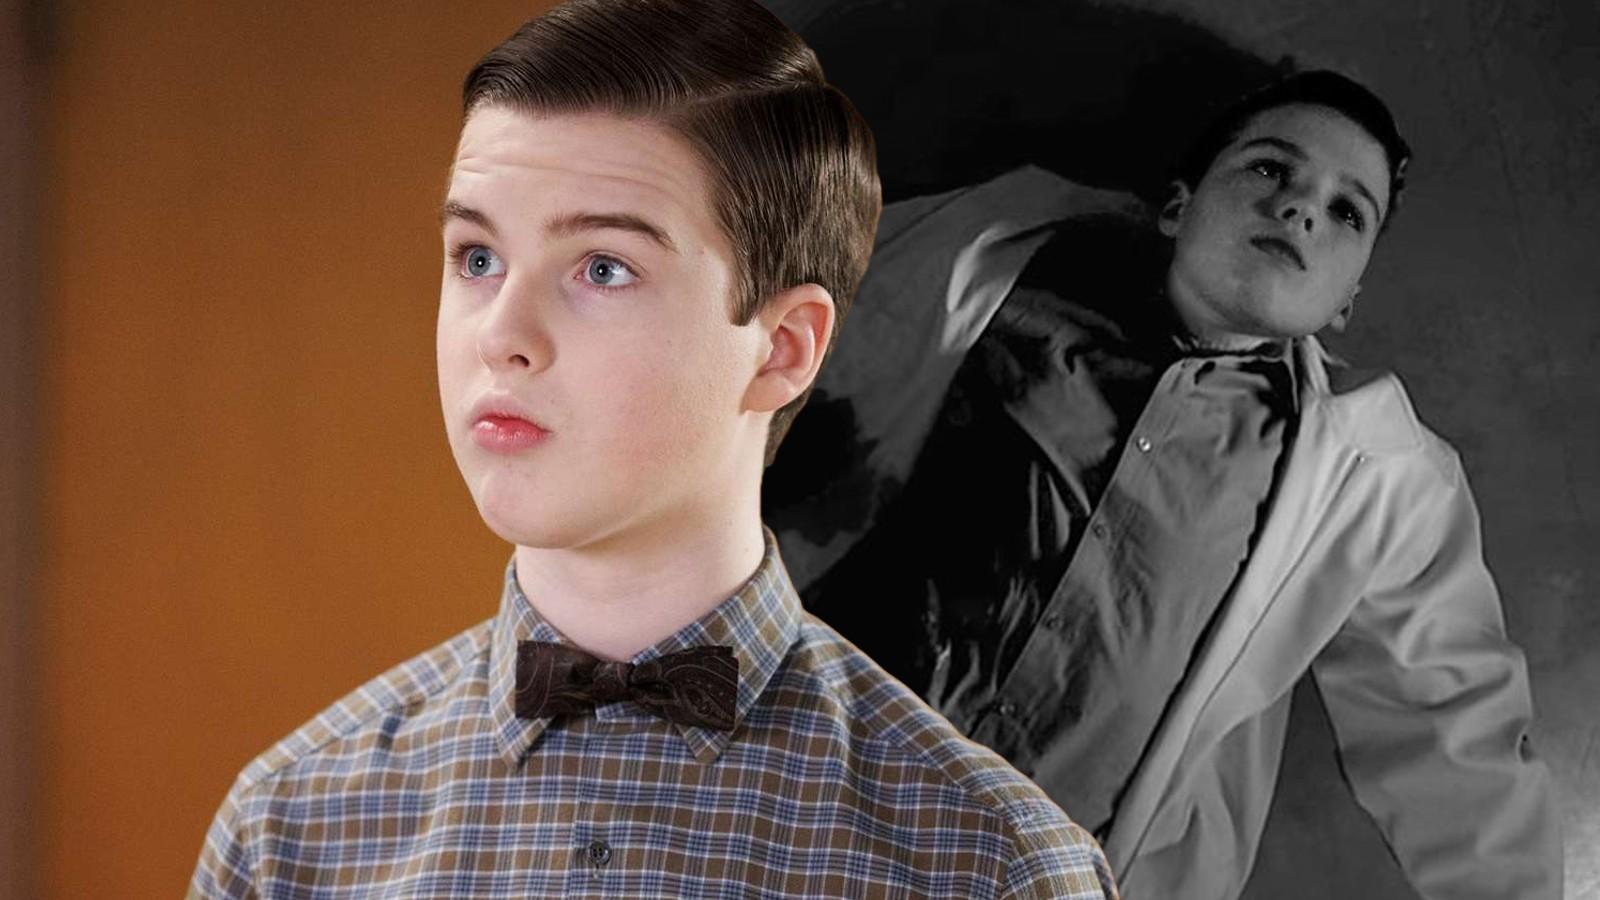 Young Sheldon and an edited image of Sheldon on Walter White's body from Breaking Bad